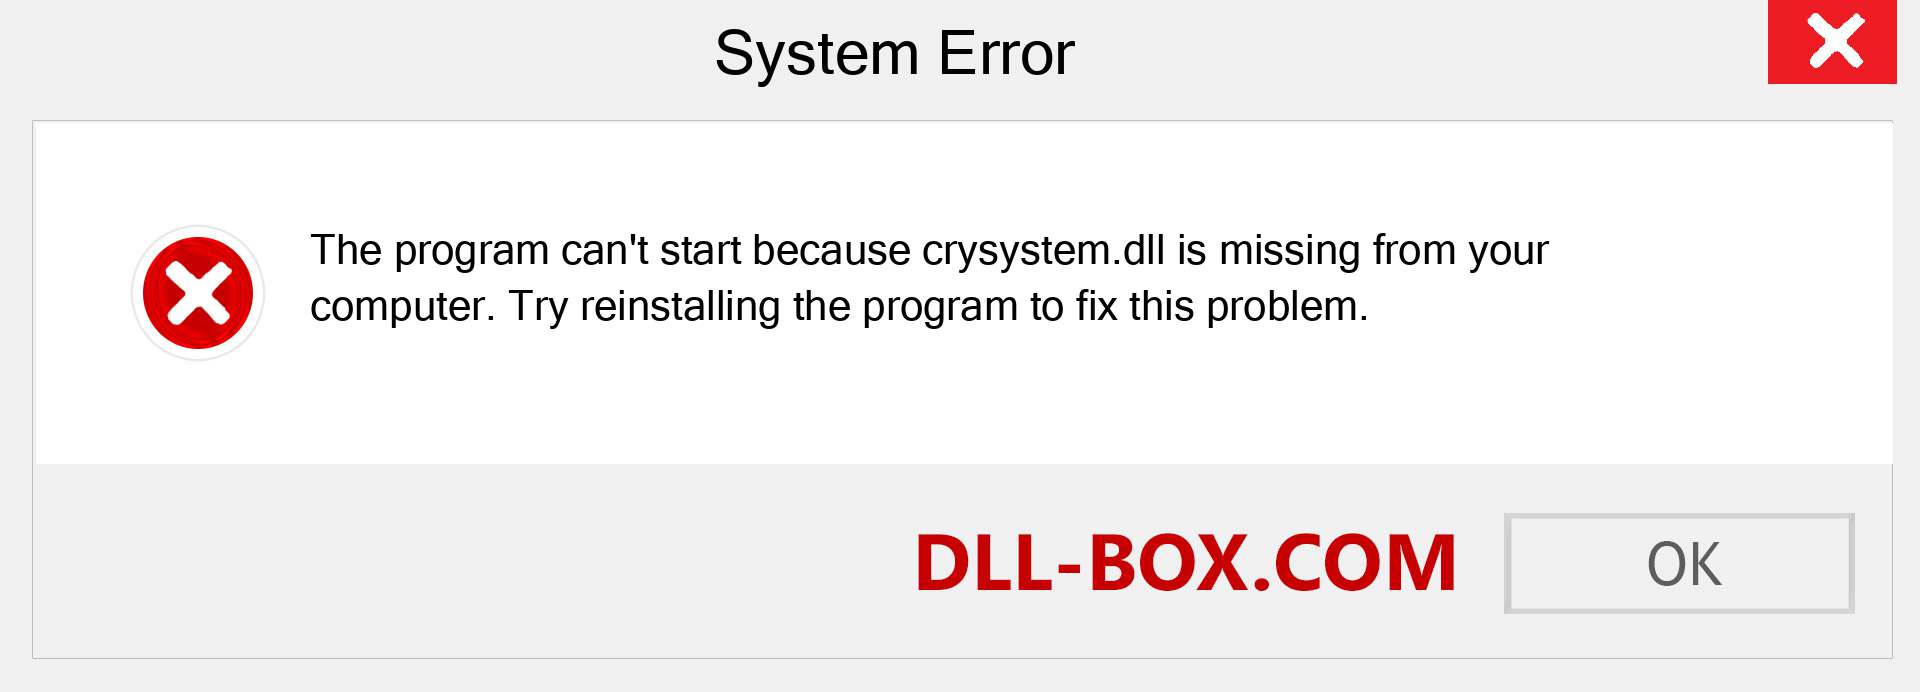  crysystem.dll file is missing?. Download for Windows 7, 8, 10 - Fix  crysystem dll Missing Error on Windows, photos, images